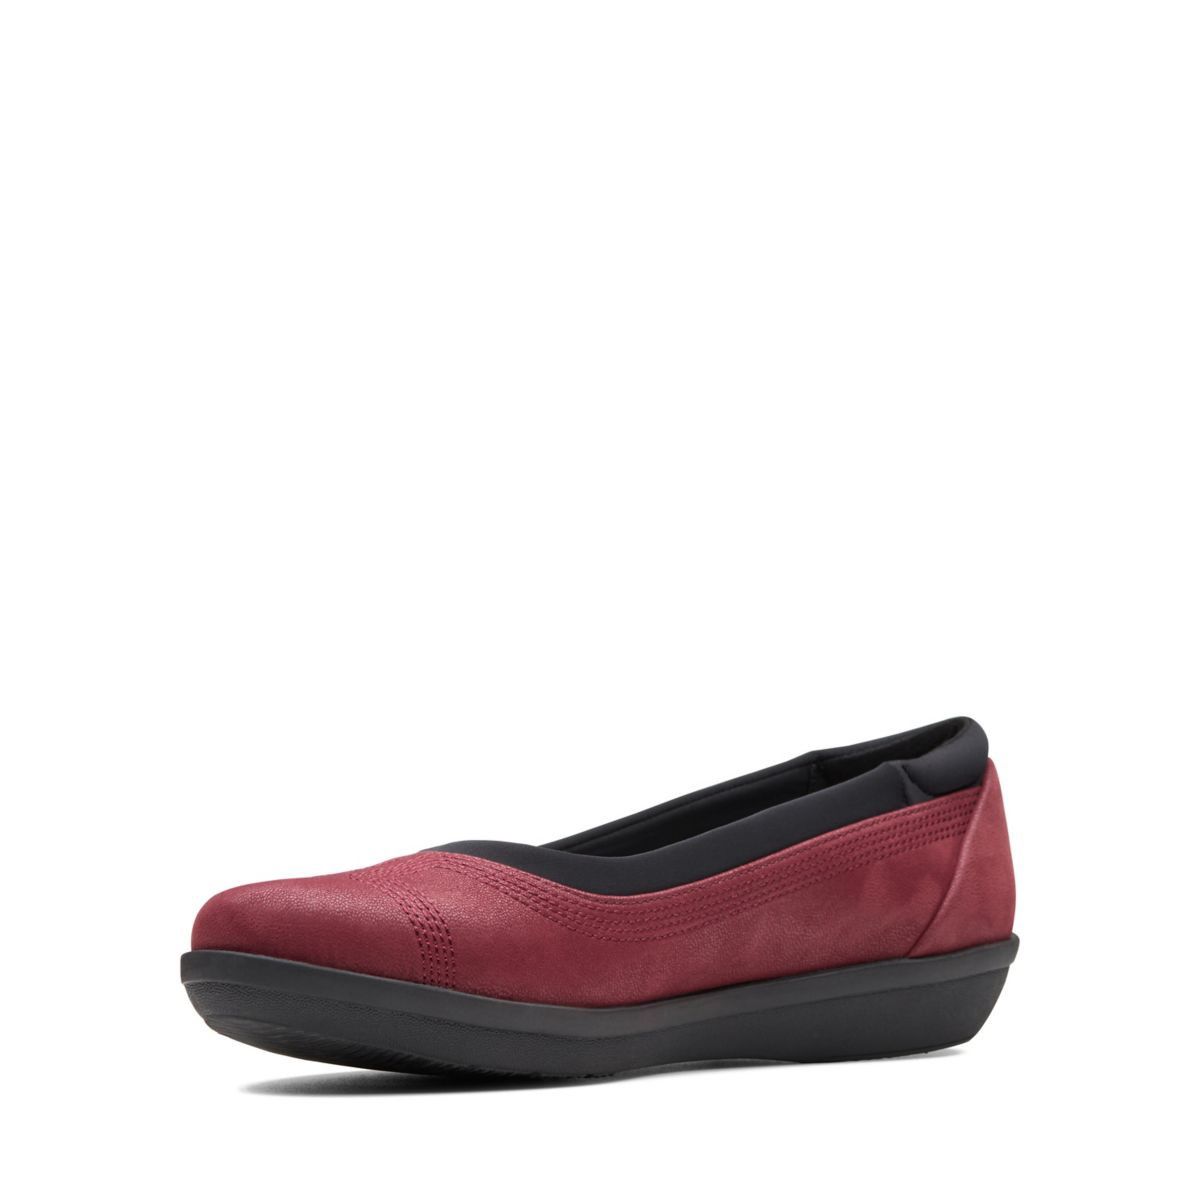 Clarks Womens Ayla Pure Closed Toe Loafers, Burgundy Intrest, Size 8.0 ...